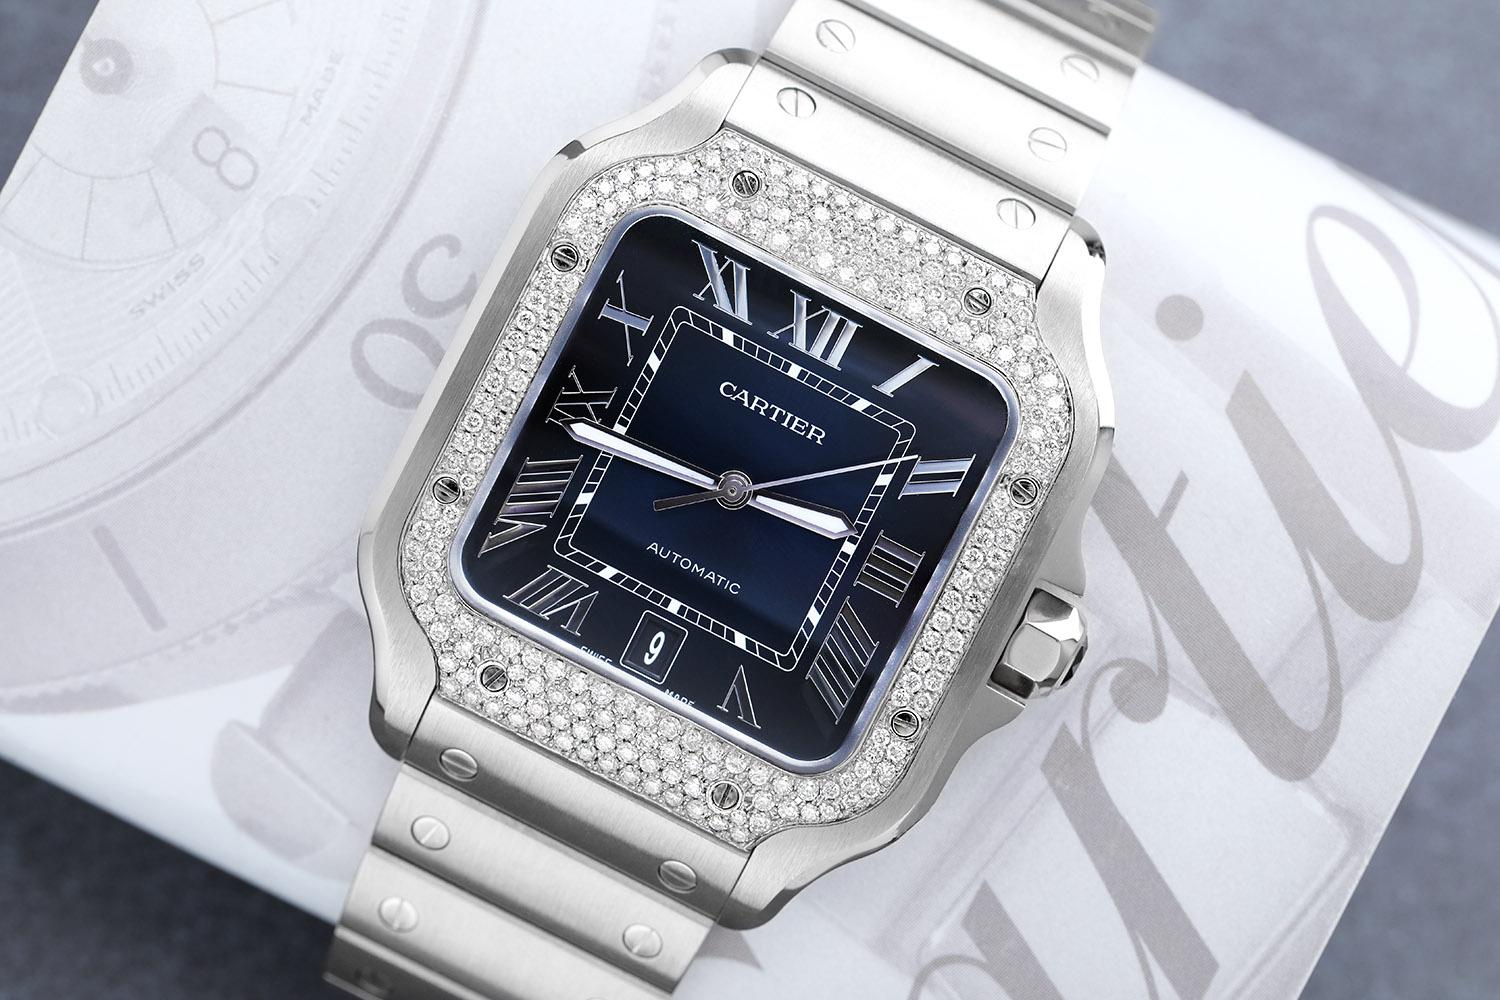 Cartier Santos Large Stainless Steel Watch with Custom Diamond Bezel Factory Blue Roman Numeral Dial
WATCH COMES WITH AN ADDITIONAL BLUE LEATHER STRAP! Mechanical movement with automatic winding, caliber 1847 MC. Steel case, 7-sided crown set with a